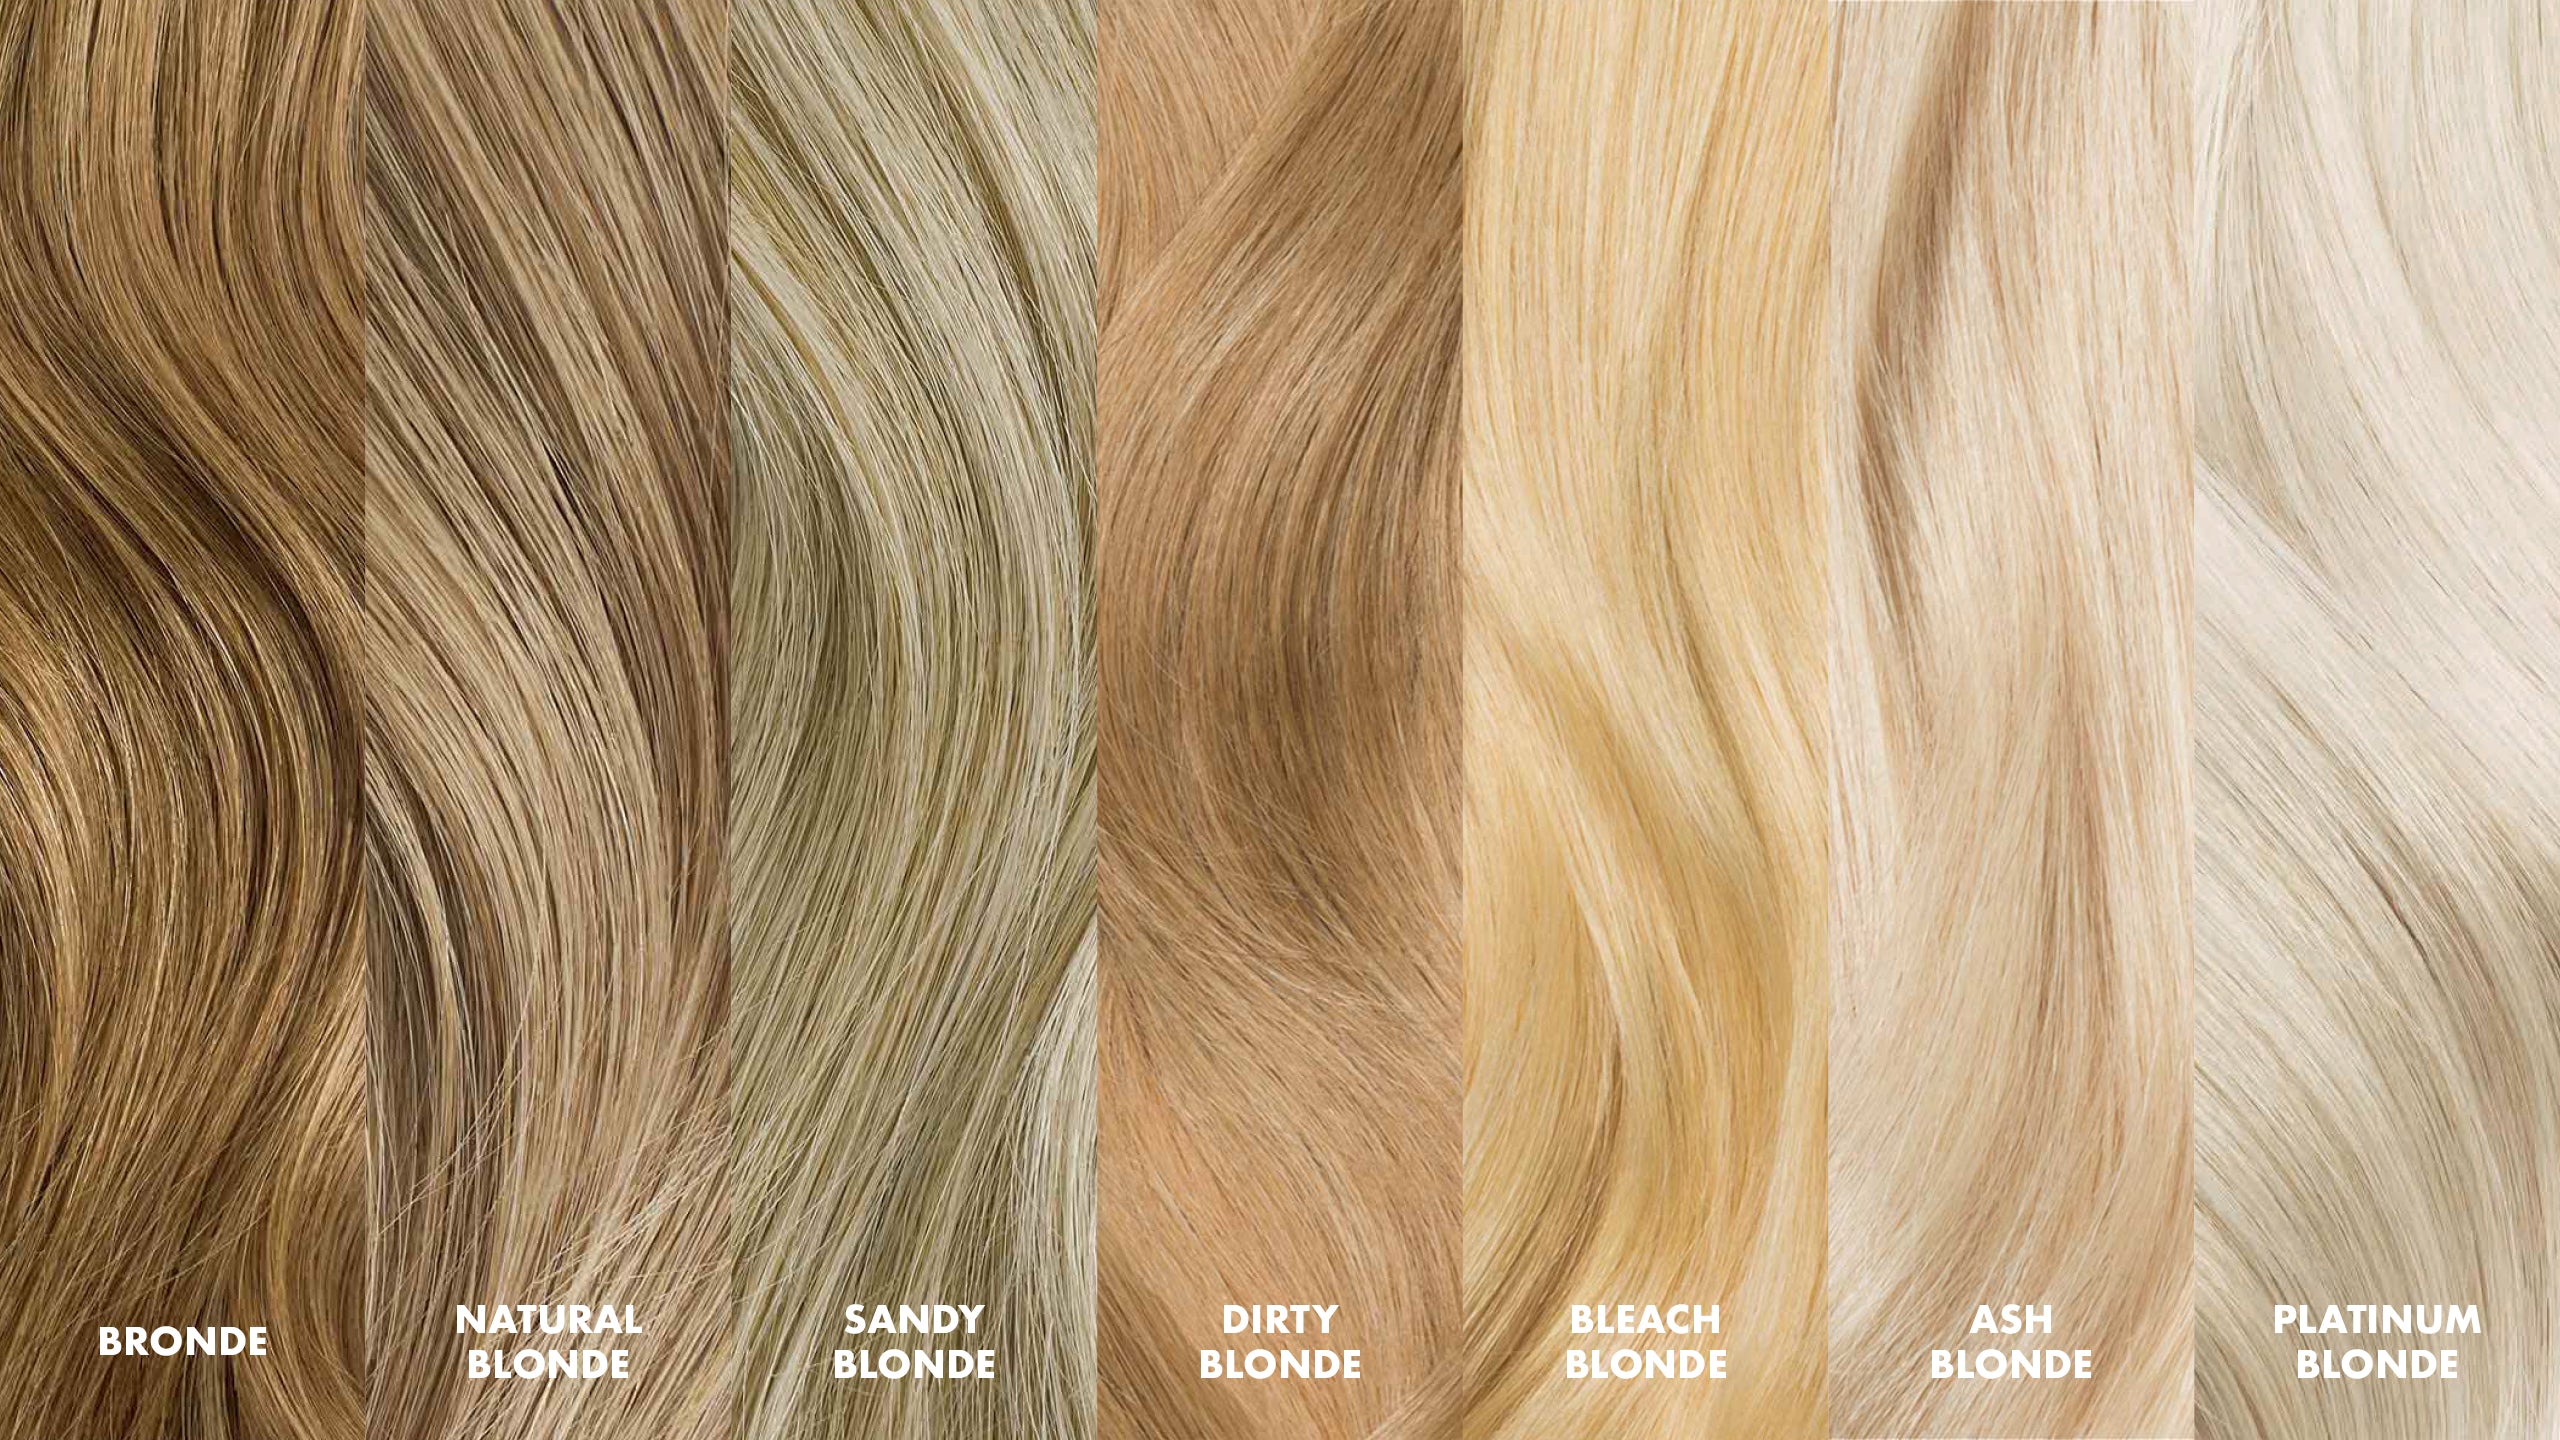 6. "Ashen Blonde Hair Color vs. Platinum Blonde: What's the Difference?" - wide 5